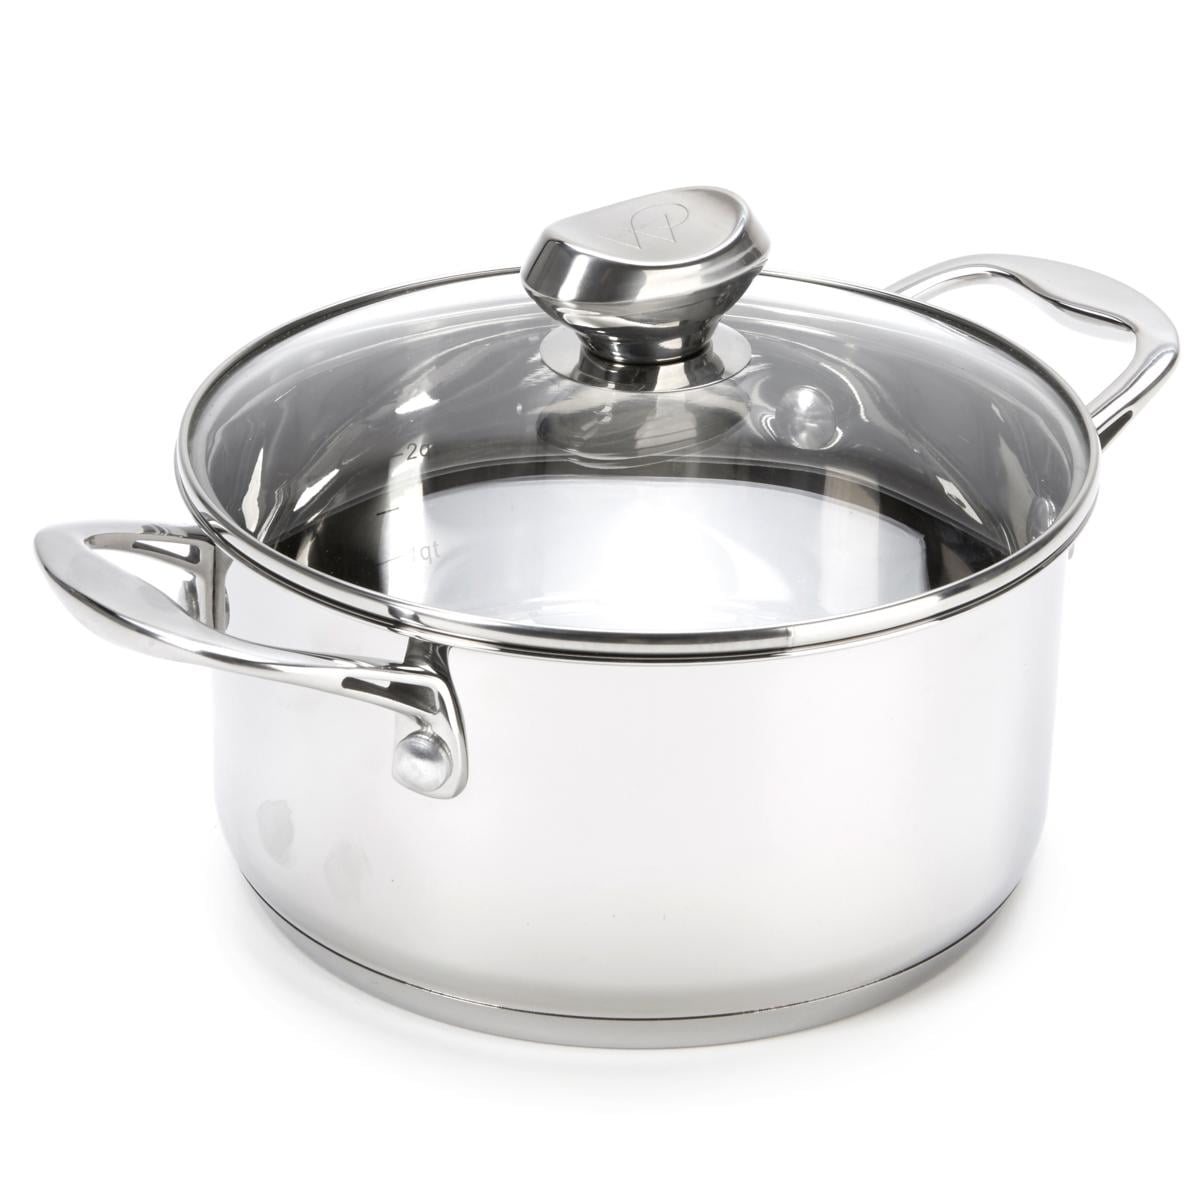 Buy Wolfgang Puck Bistro Elite 27-piece Stainless Steel Cookware